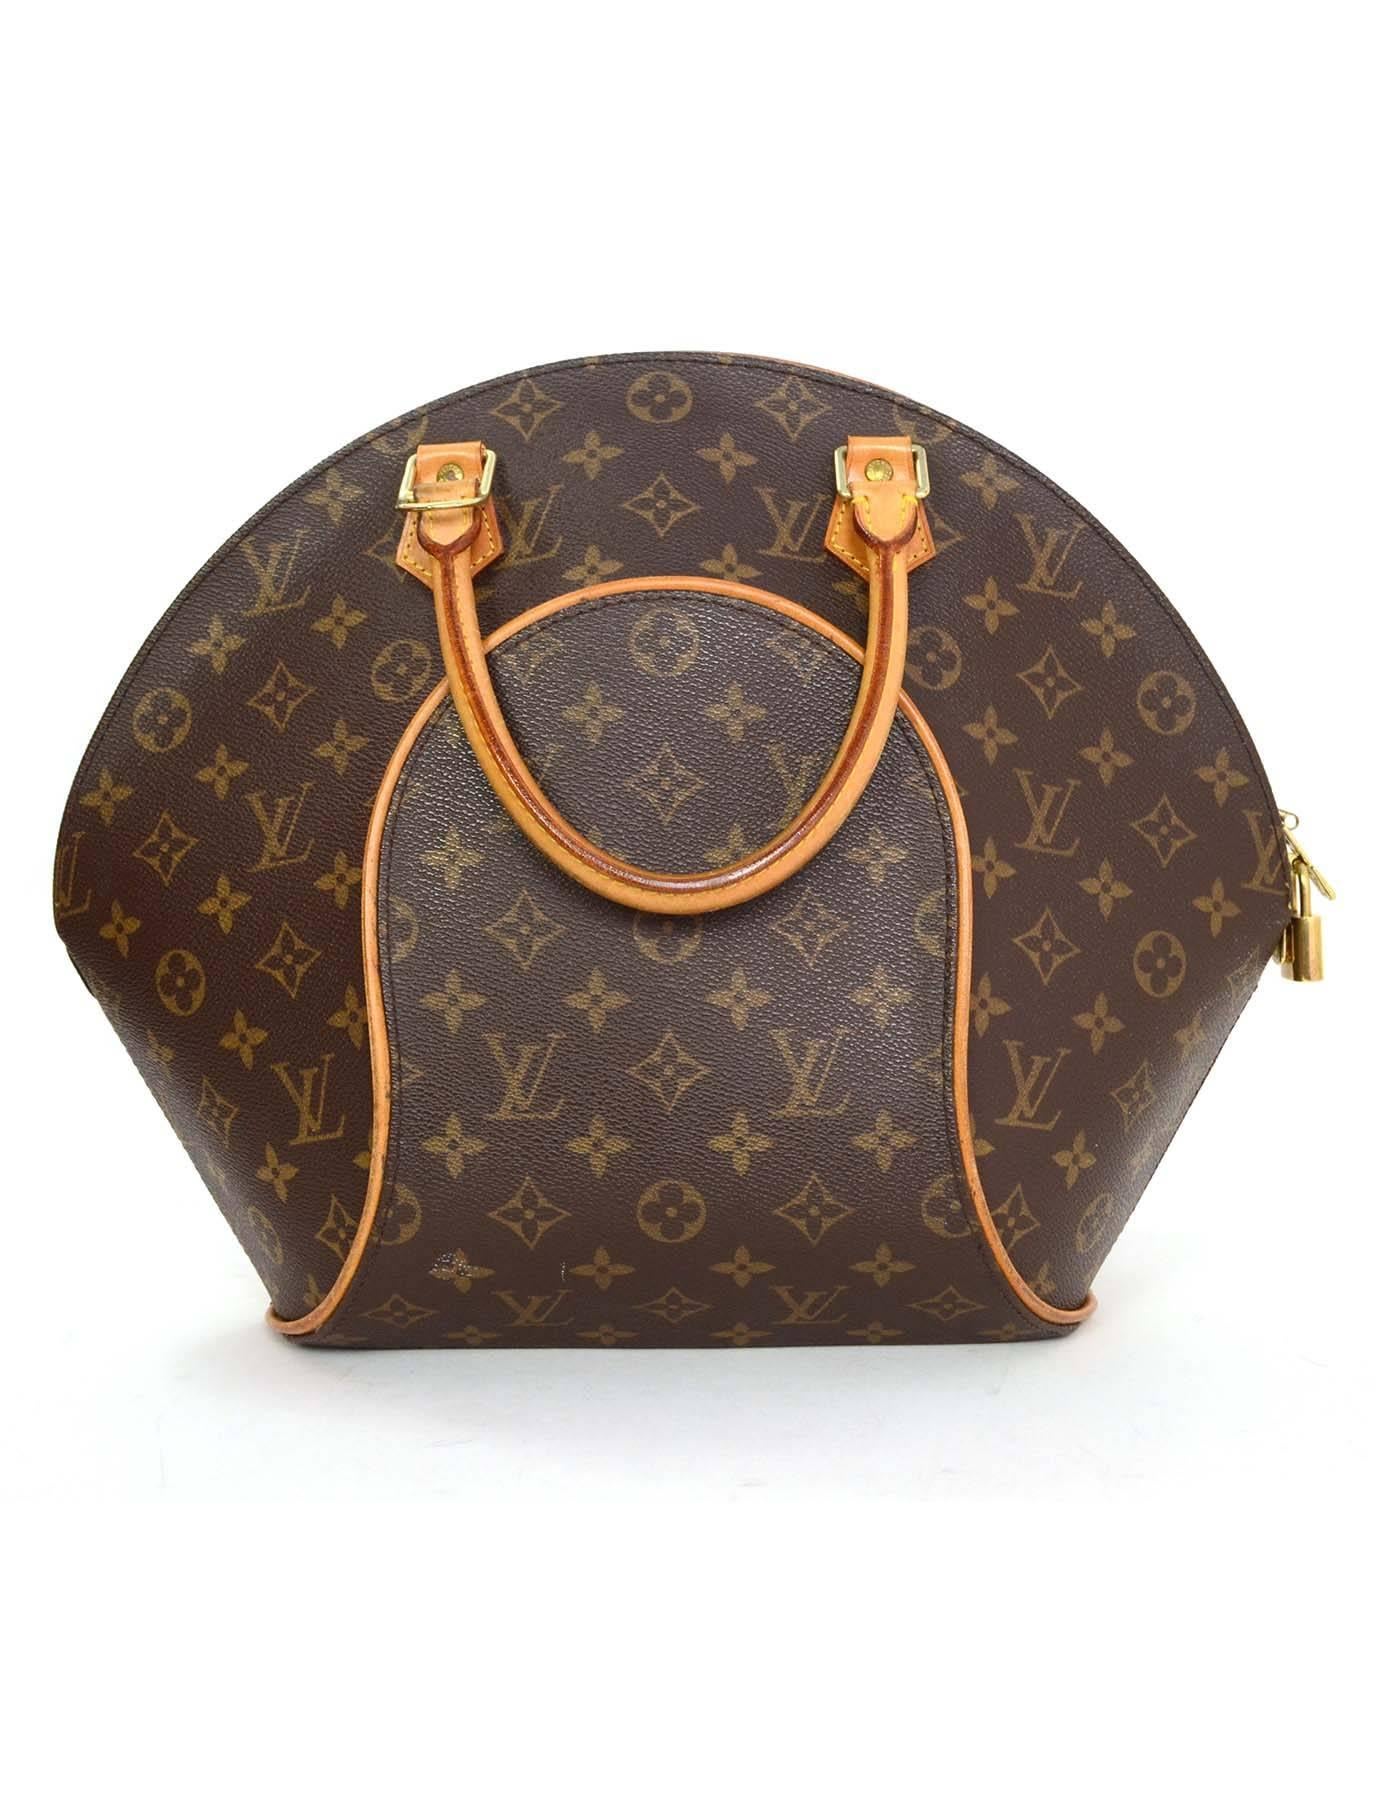 Louis Vuitton Monogram Ellipse MM Bag 
Features optional shoulder/crossbody strap
Made In: U.S.A.
Year of Production: 2000
Color: Brown and tan
Hardware: Goldtone
Materials: Leather and coated canvas
Lining: Brown canvas
Closure/Opening: